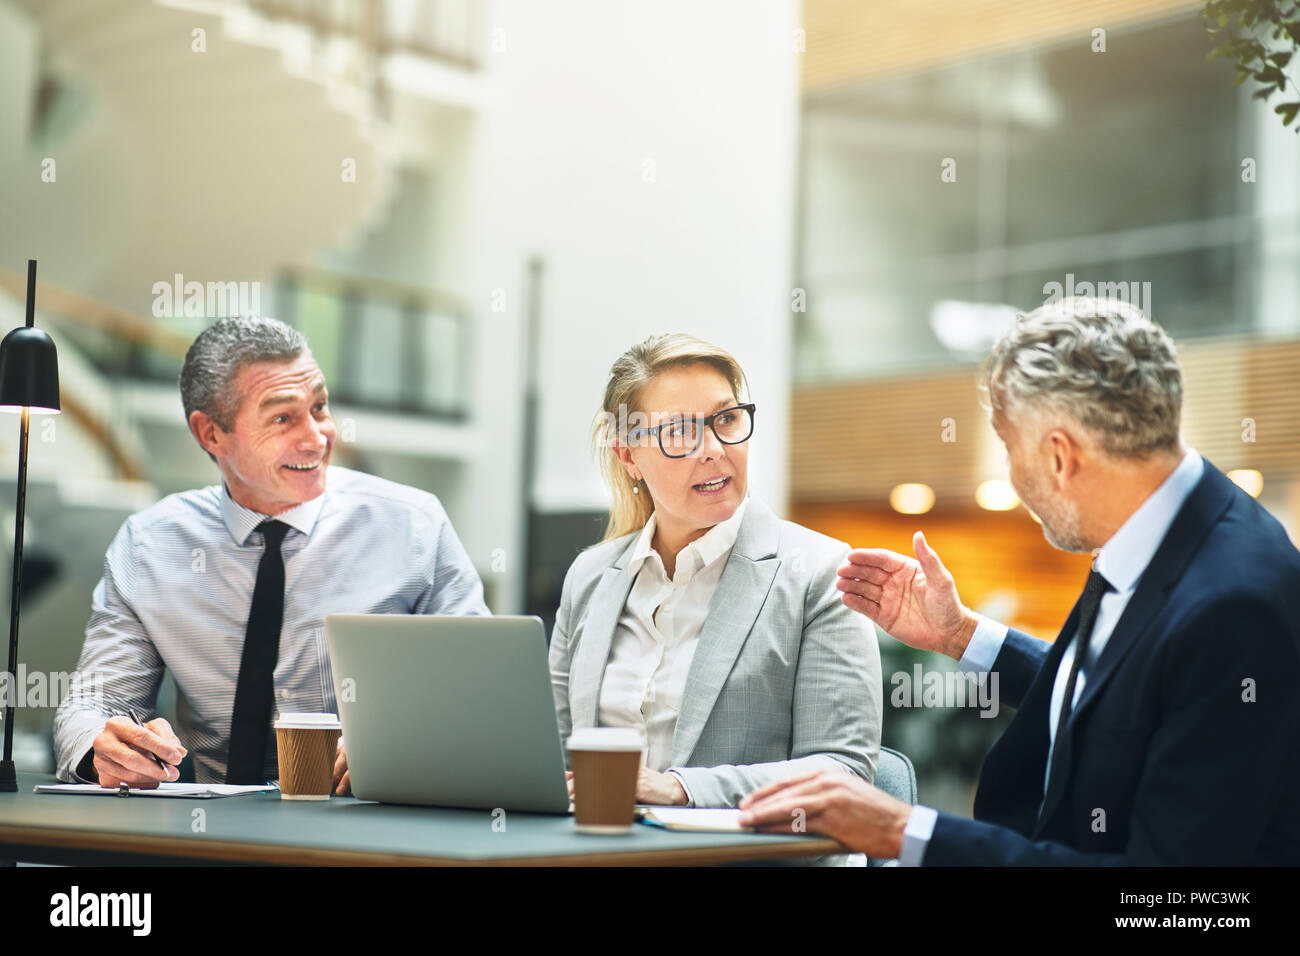 Three mature business colleagues discussing work together while having a meeting at a table in the lobby of a modern office building Stock Photo